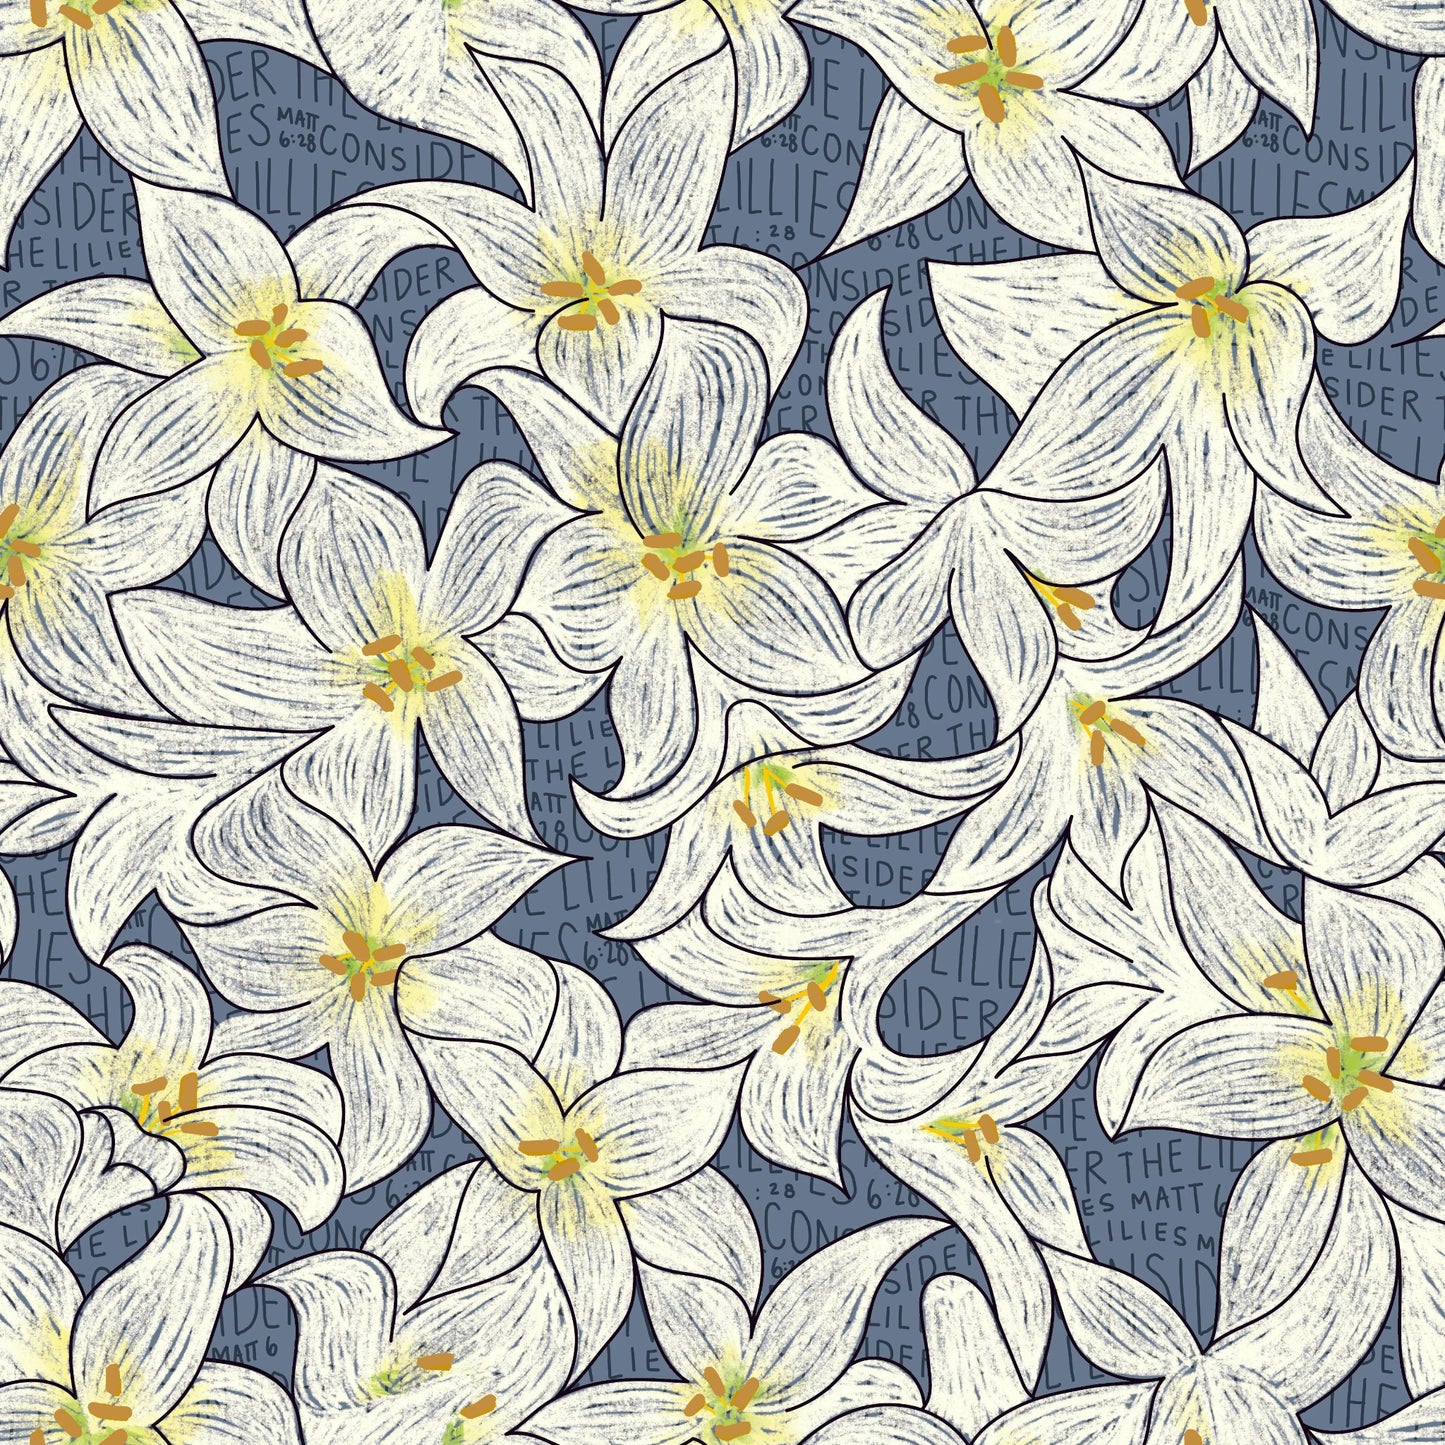 Hand drawn white lilies with yellow centers overlaying "Consider the Lilies" and "Matt 6:28" as the background.